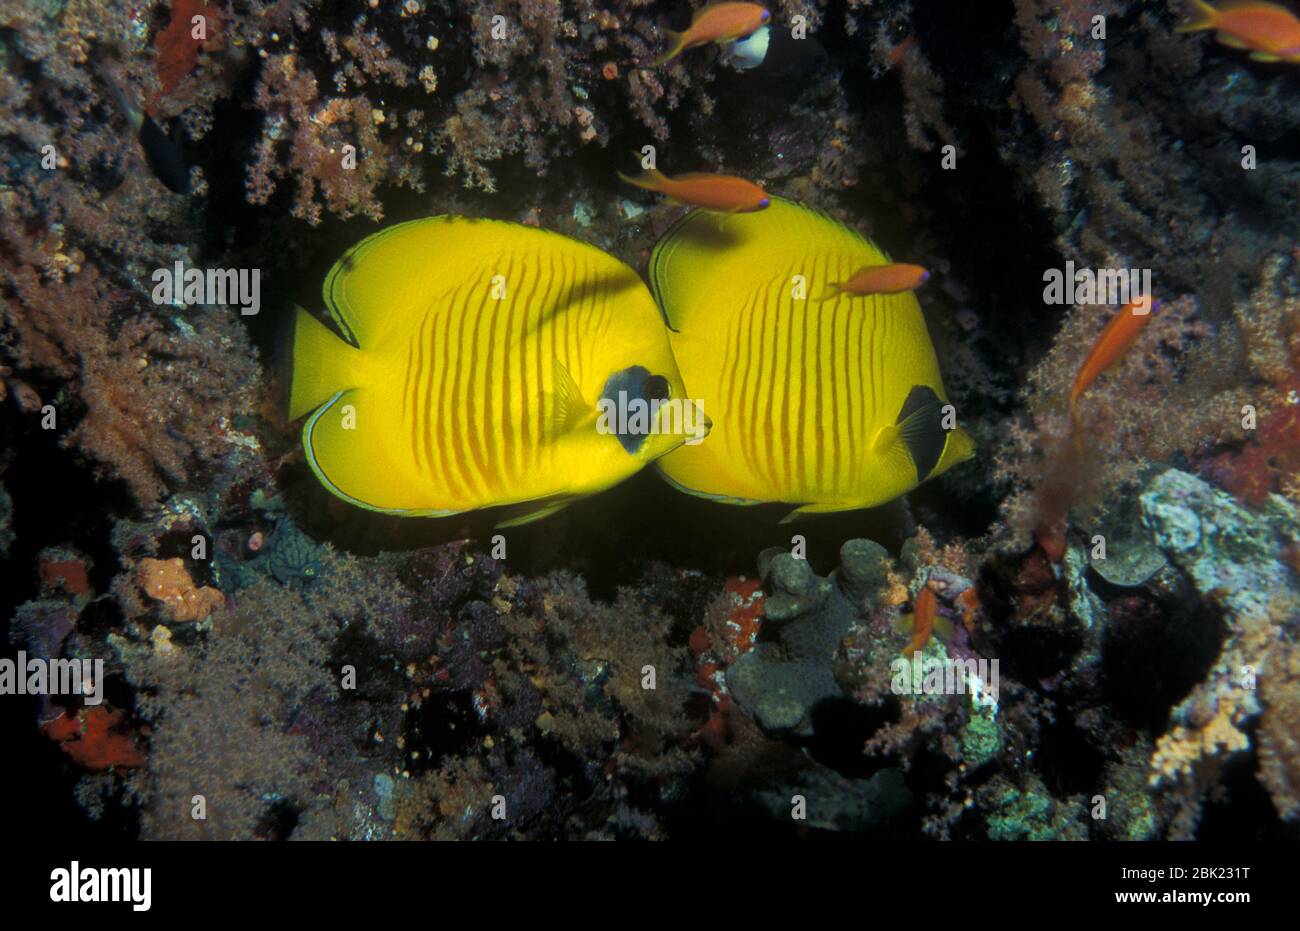 Masked or Golden Butterfly Fish, Chaetodon semilarvatus, Red Sea, yellow and blue, Stock Photo